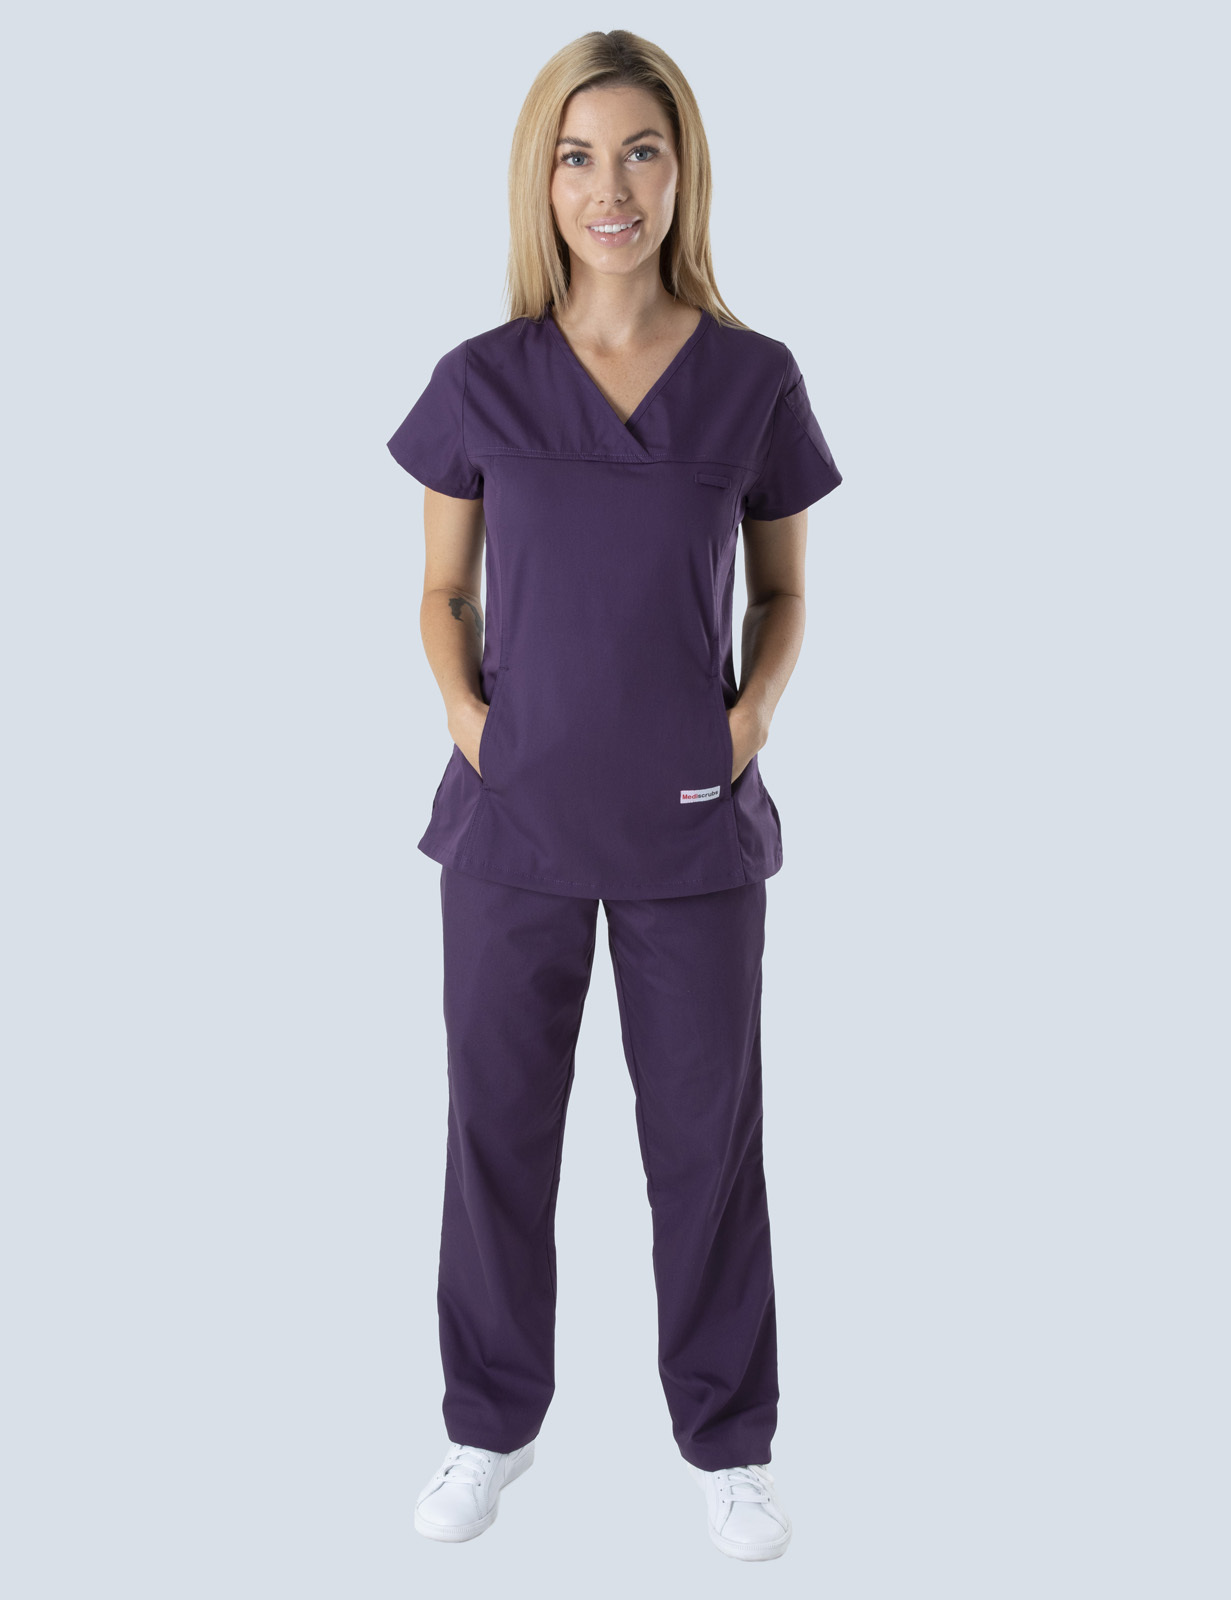 Bundaberg Hospital Family Unit (Women's Fit Solid Scrub Top and Cargo Pants in Aubergine incl Logos)